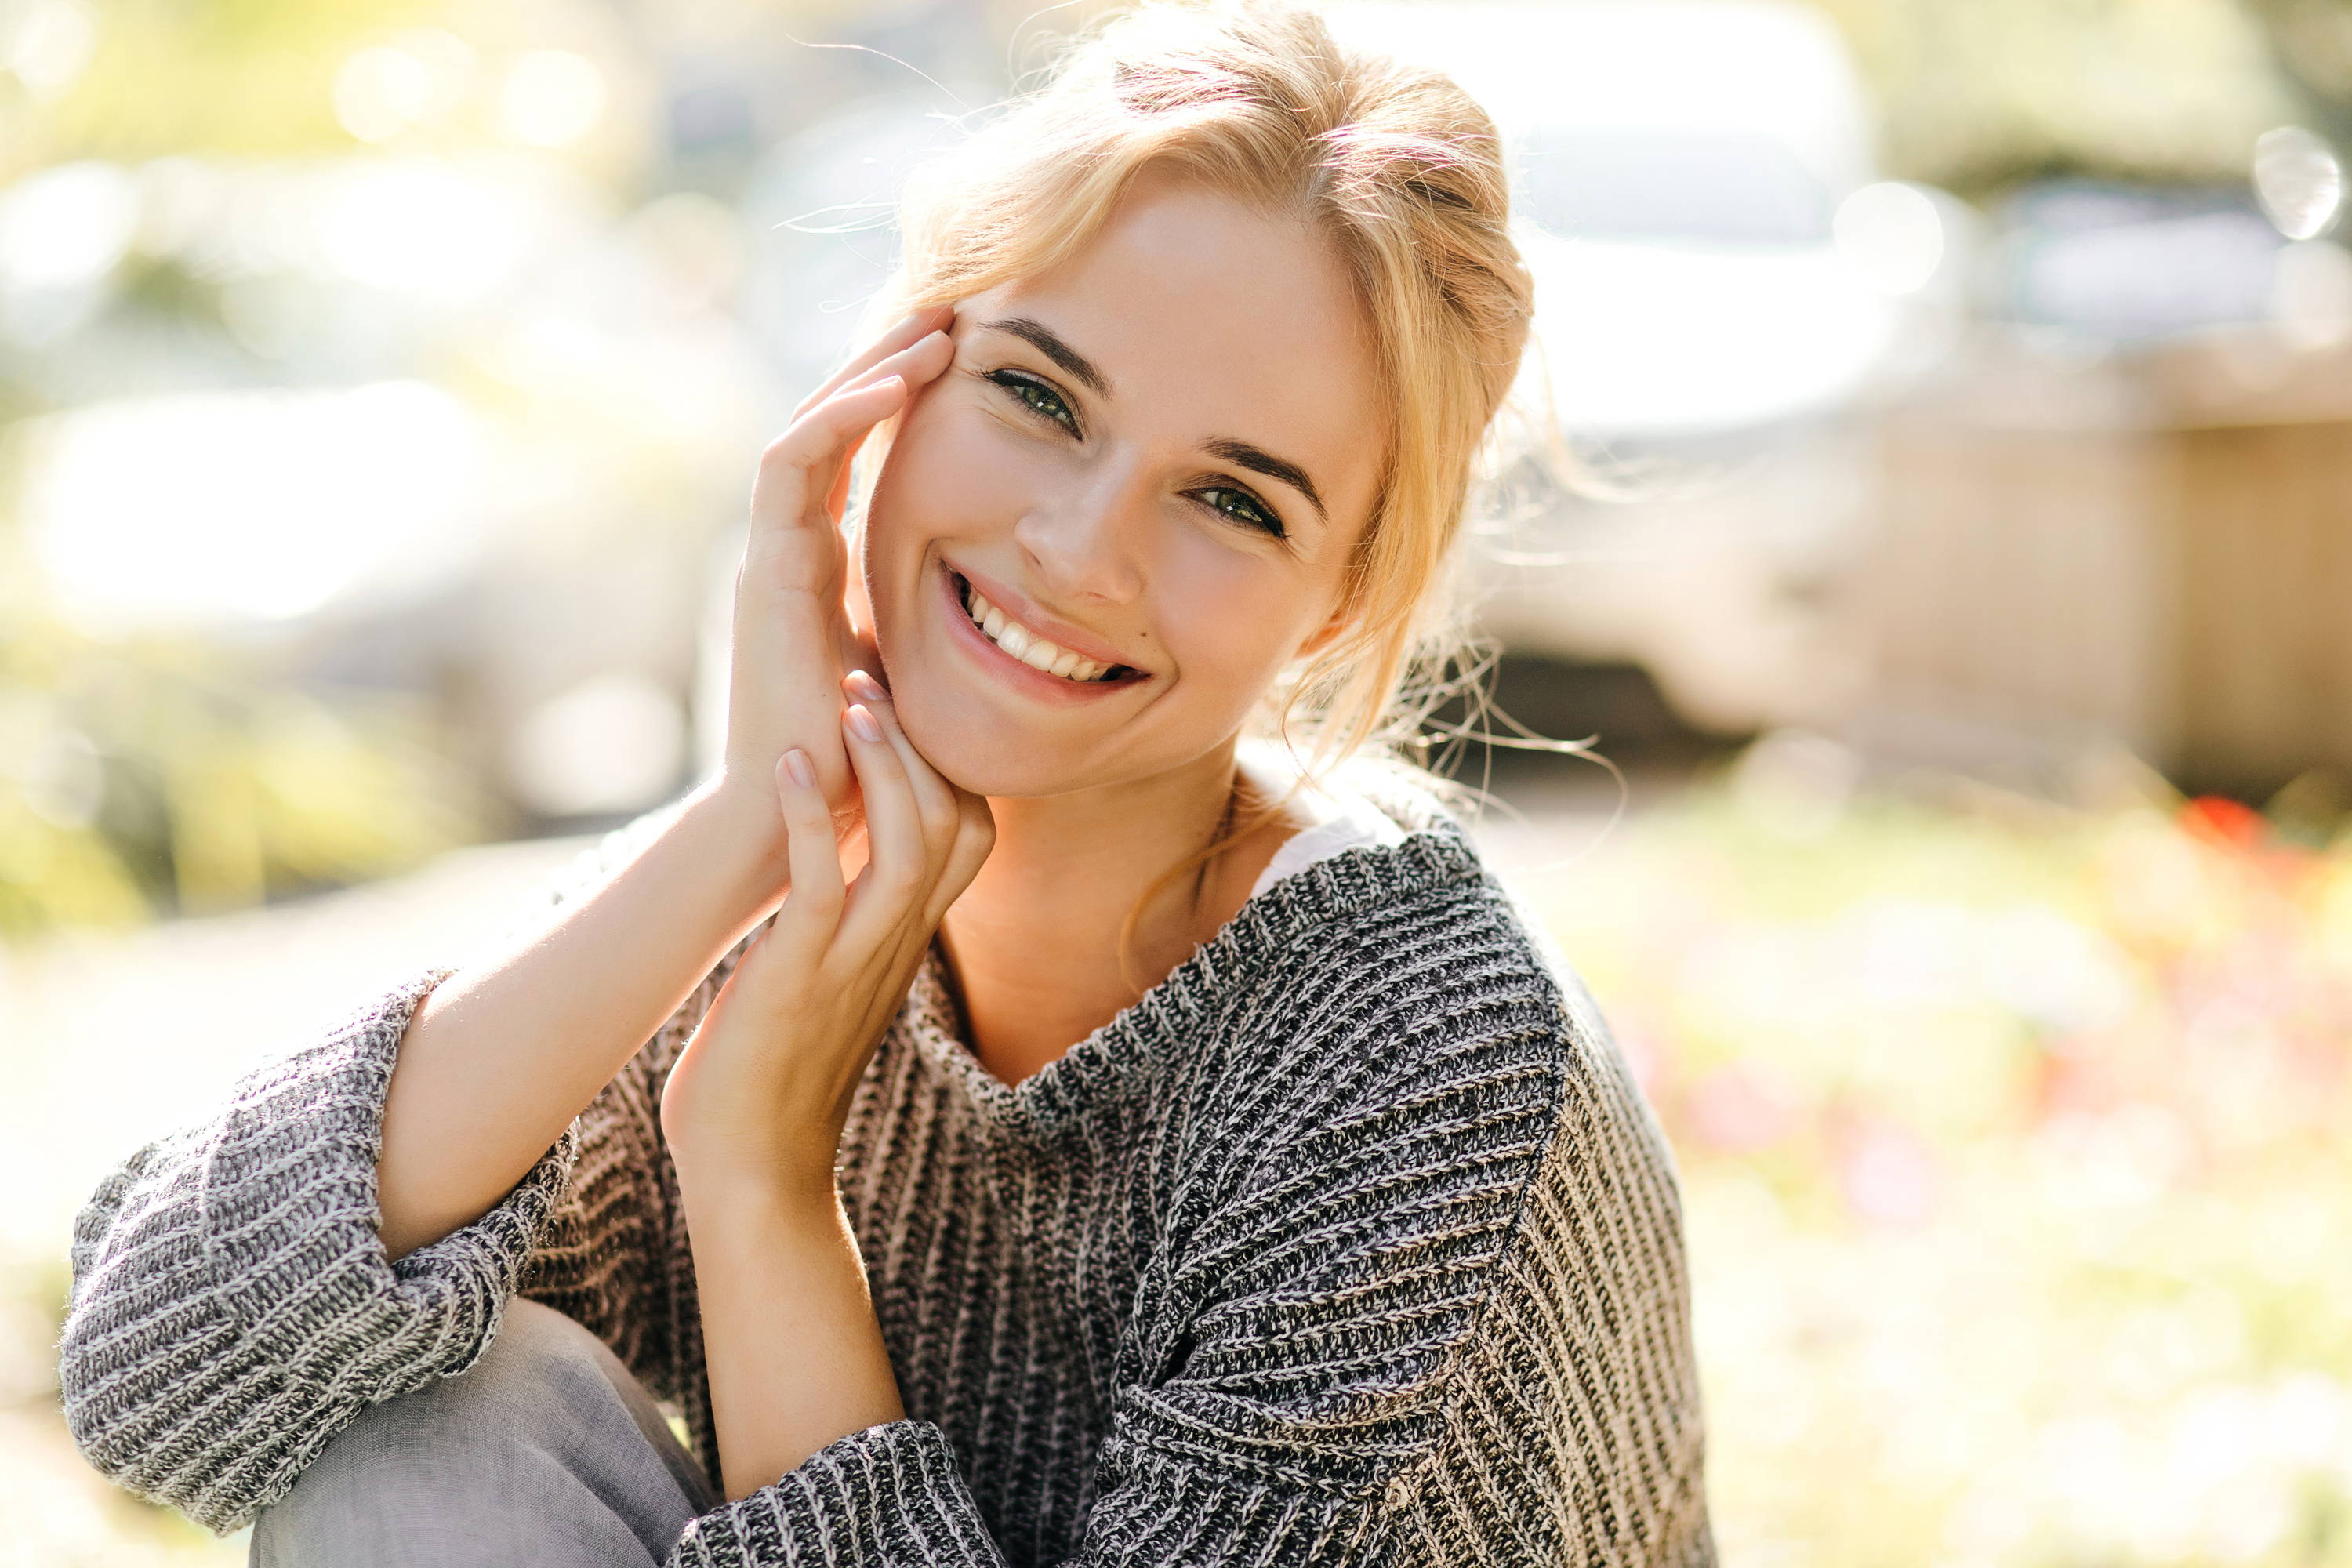 Positive woman with charming smile looks into camera